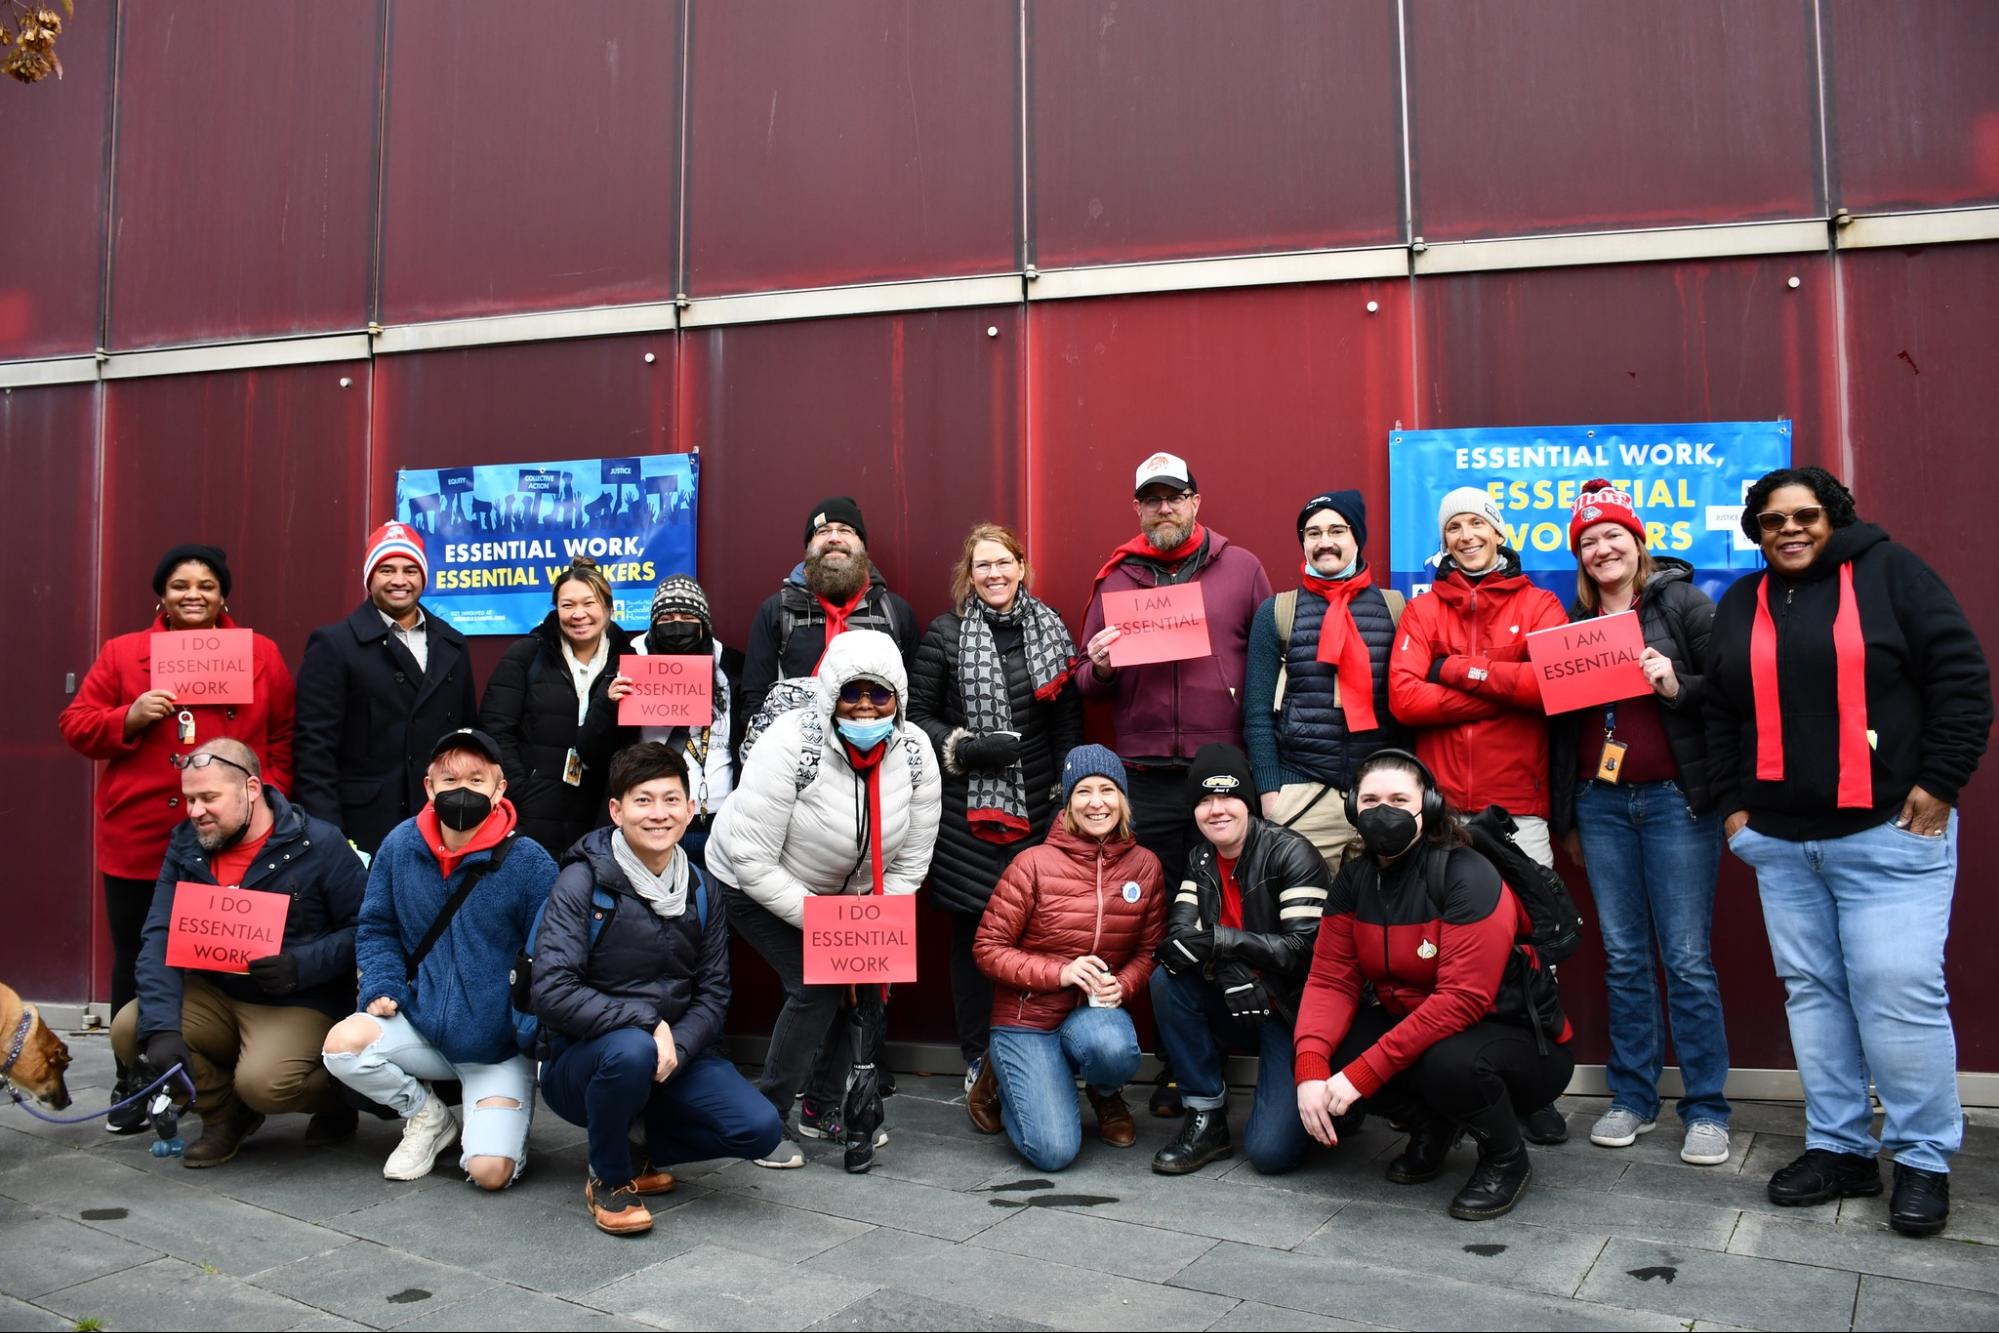 A group of people posing together outside in front of a red wall holding red signs for an essential workers demonstration.